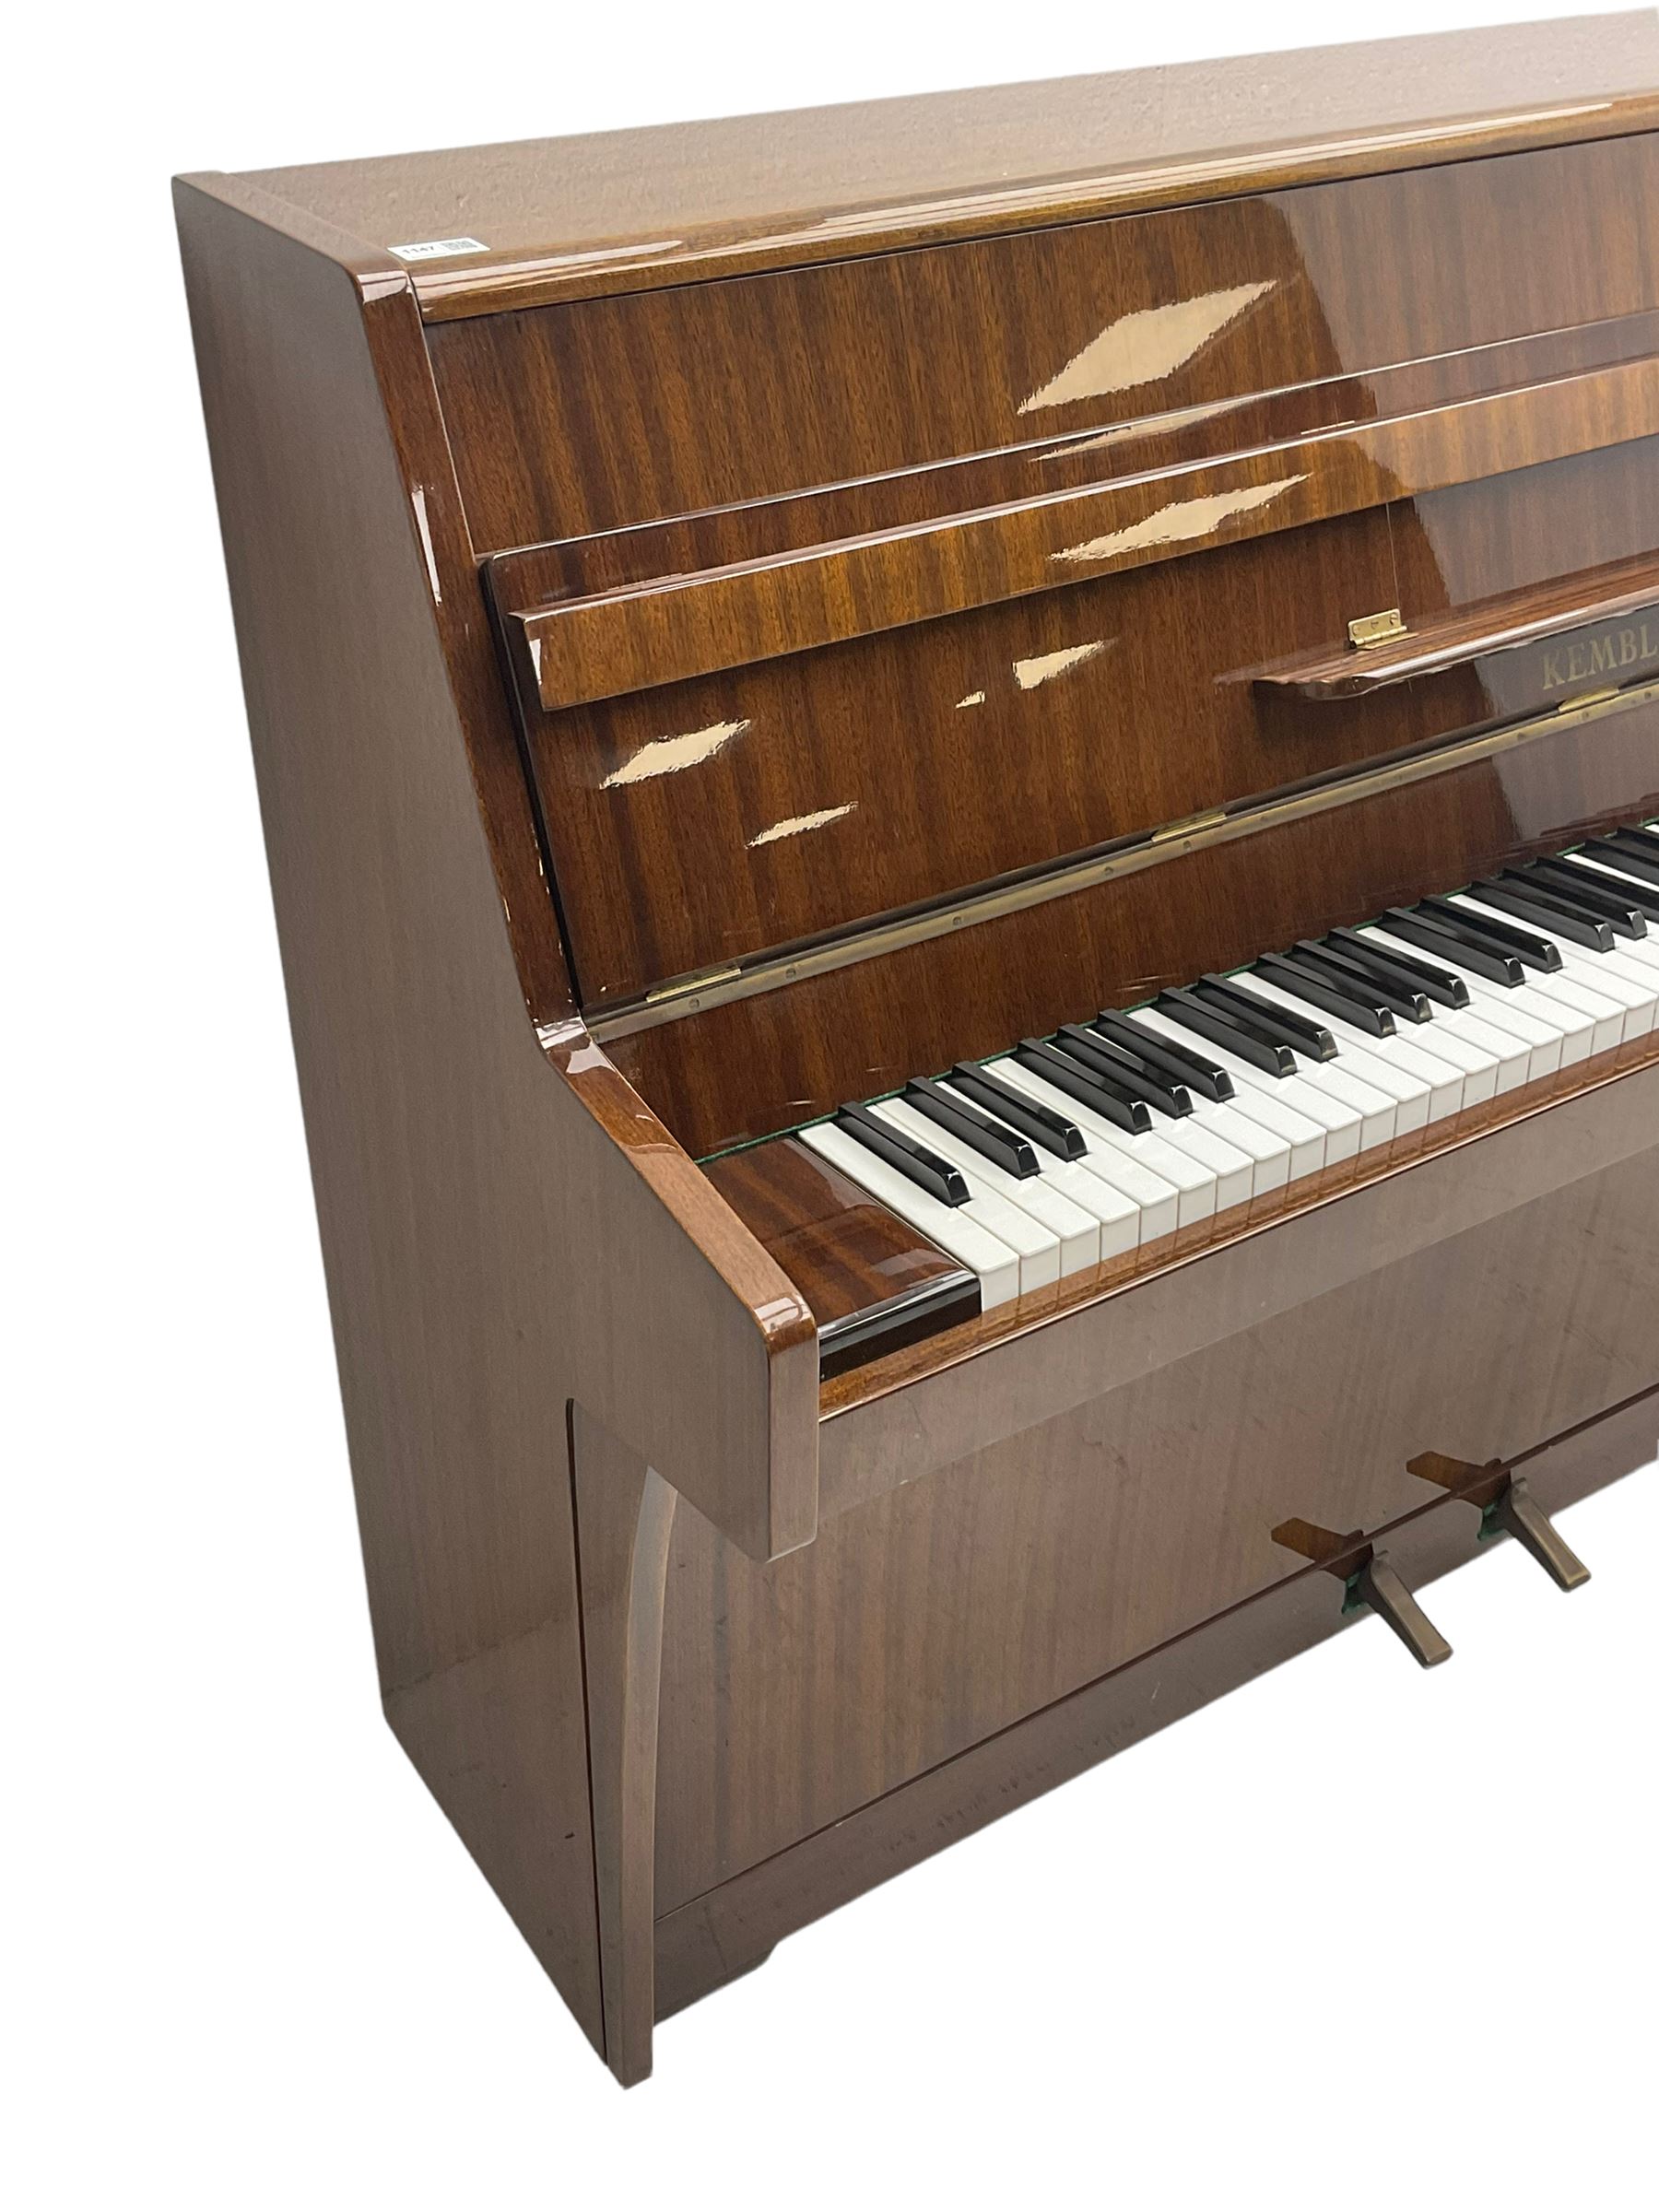 Kemble - upright piano in lacquered mahogany case - Image 4 of 9